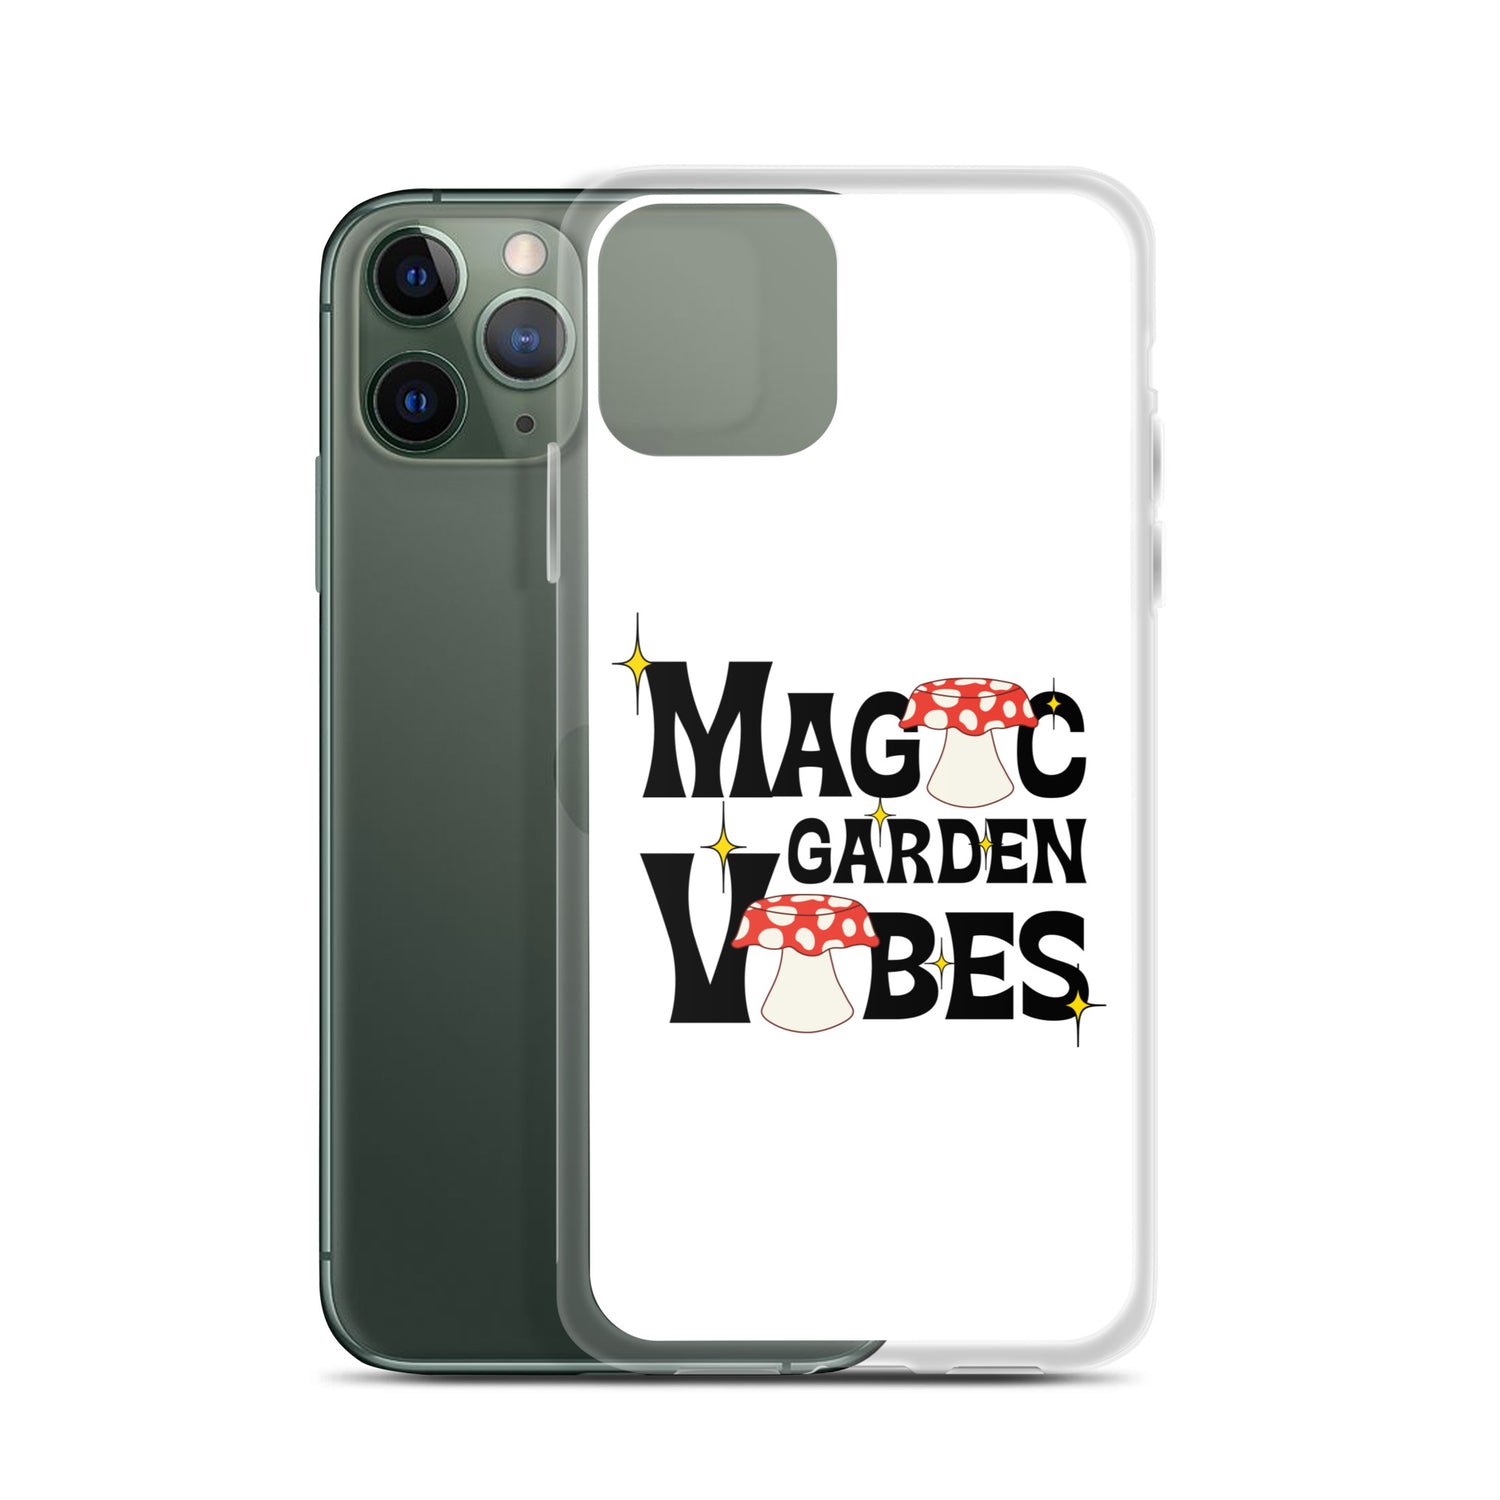 MG Vibes iPhone Cover, White